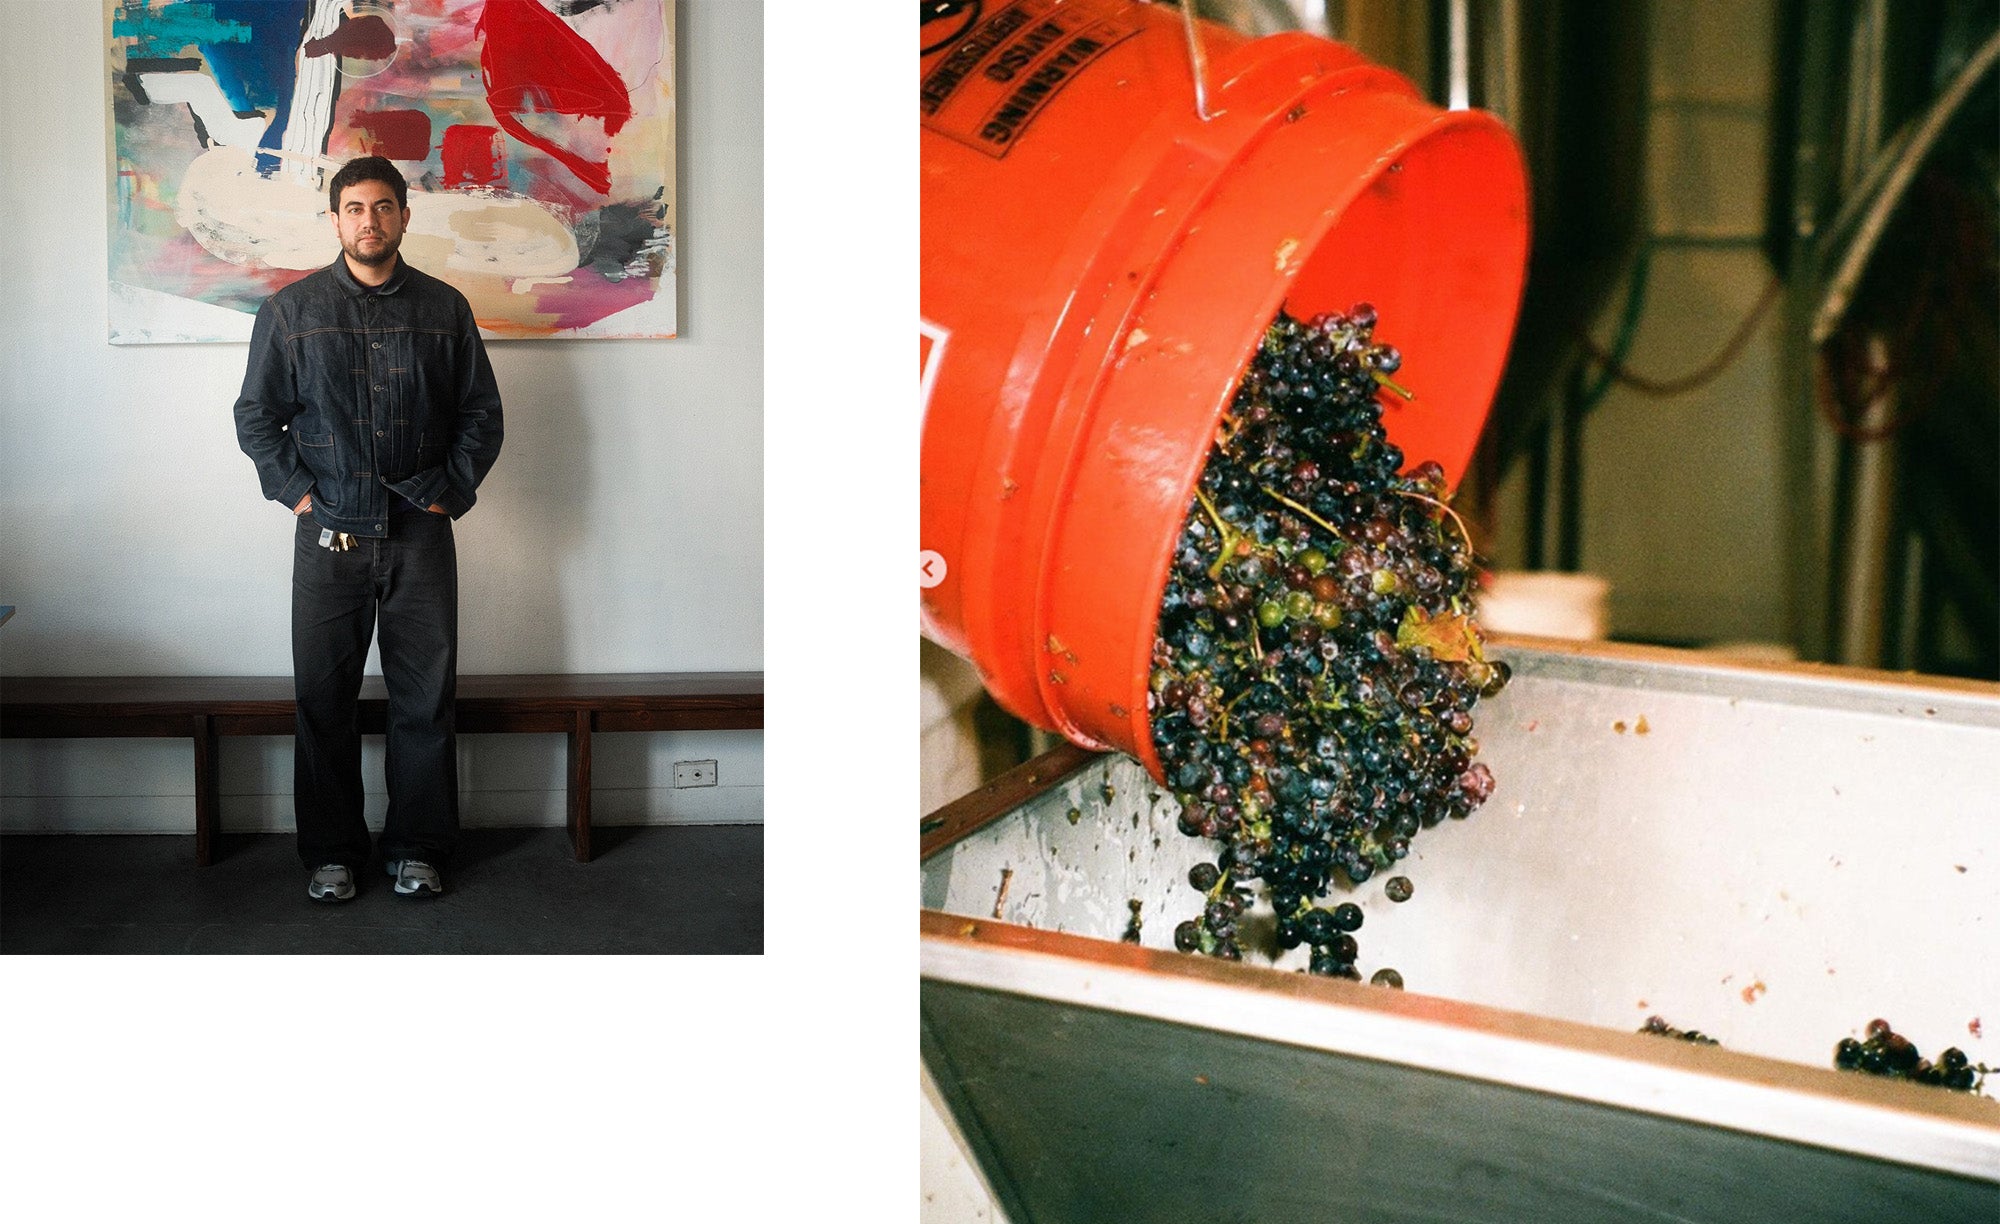 A diptych of a man standing in front of a painting in denim, along with grapes being poured out of a bucket.